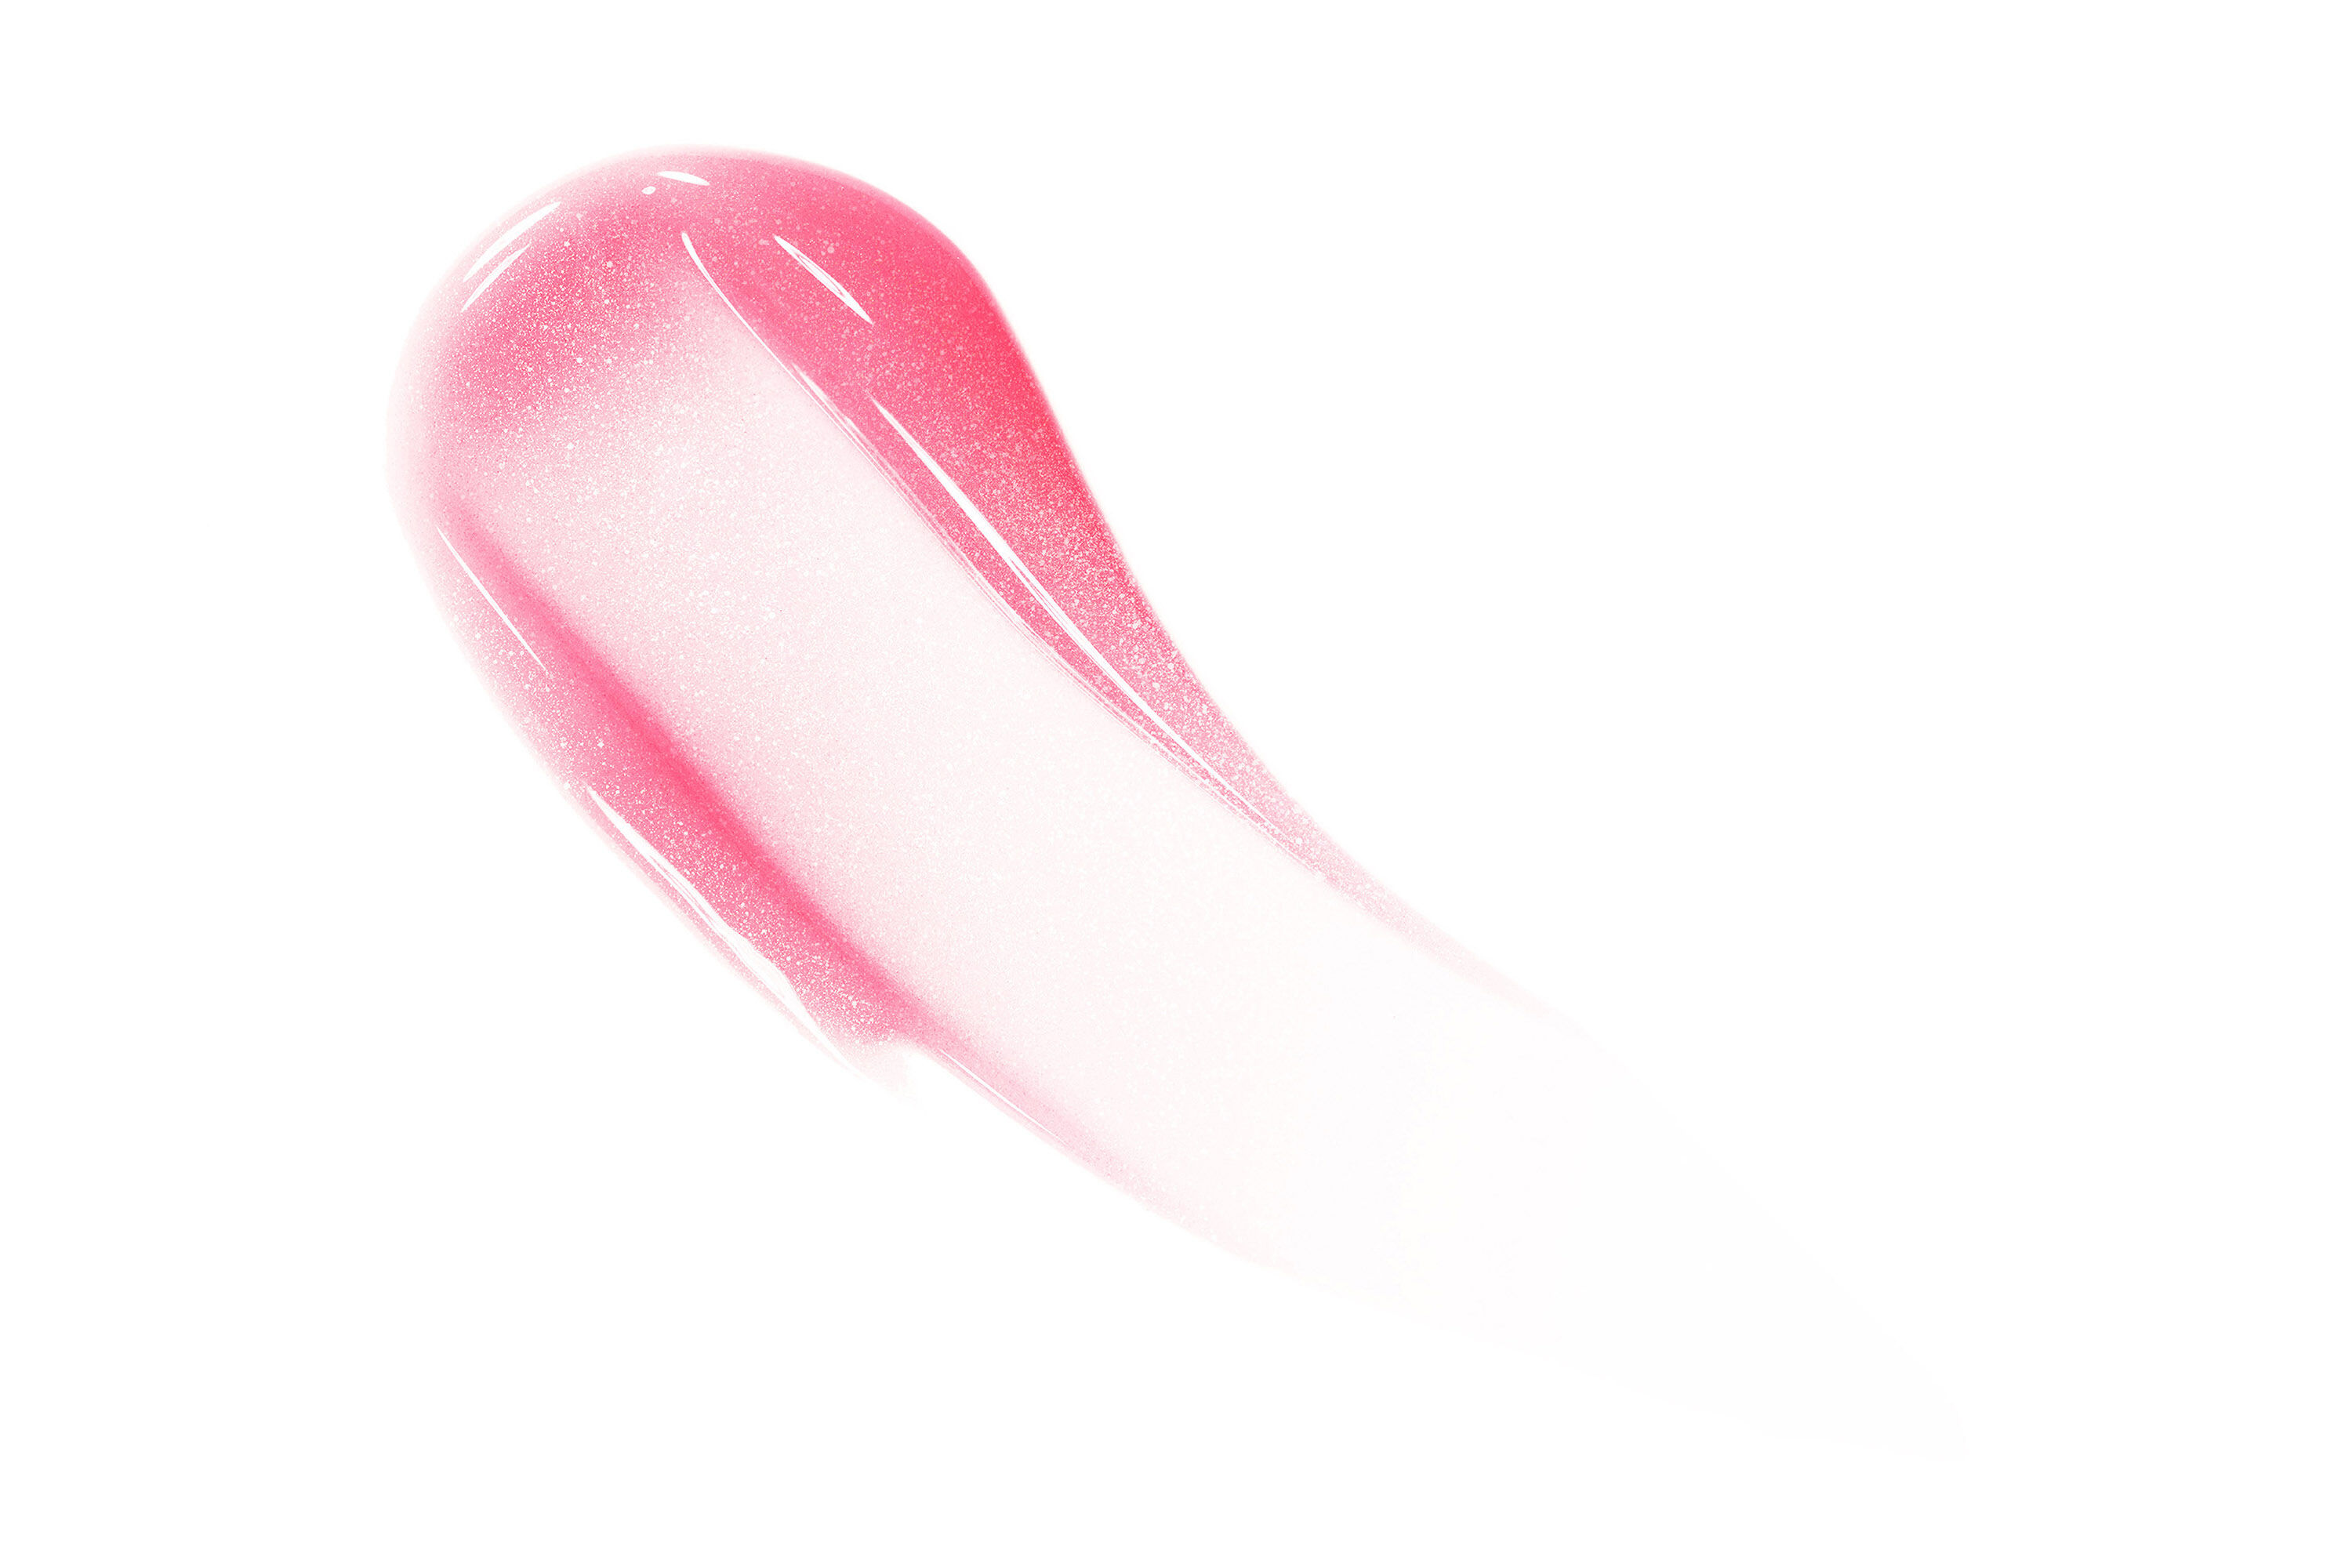 ADDICT LIP MAXIMIZER, Plumping Gloss from DIOR - 010 Holographic Pink